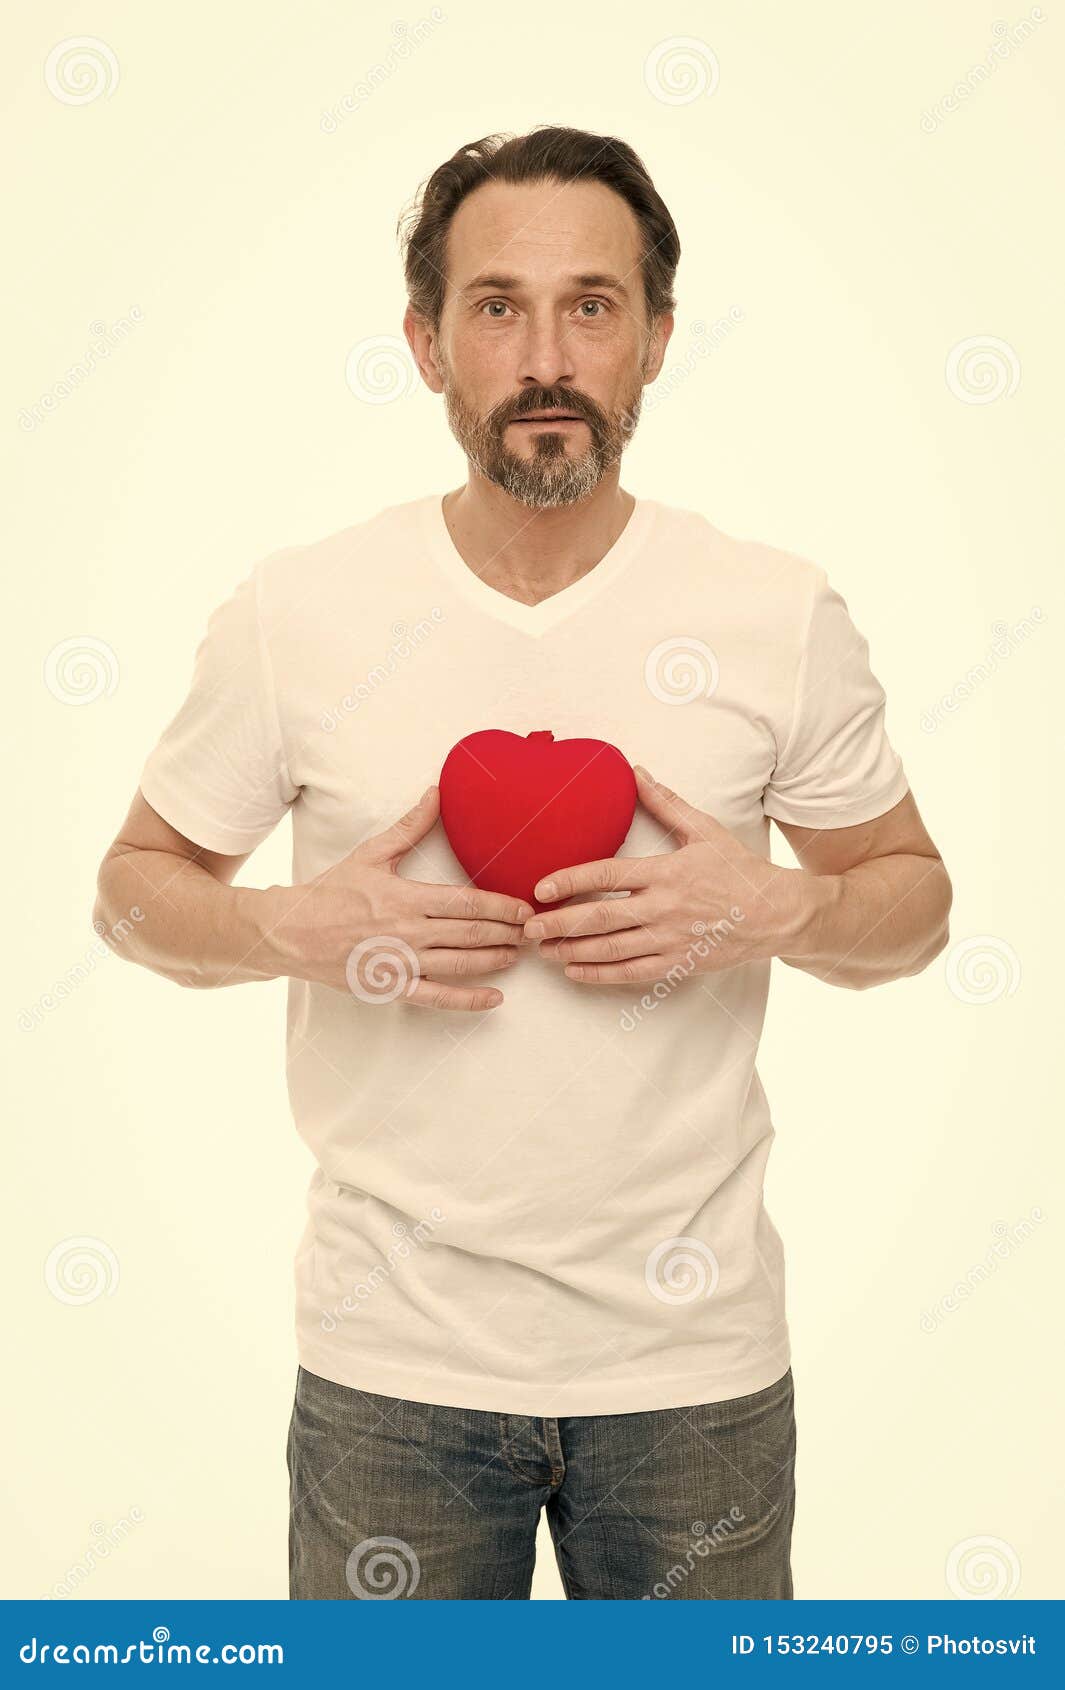 Greeting From Sincere Heart Man Bearded Hipster Hold Heart Celebrate Valentines Day Imagen De